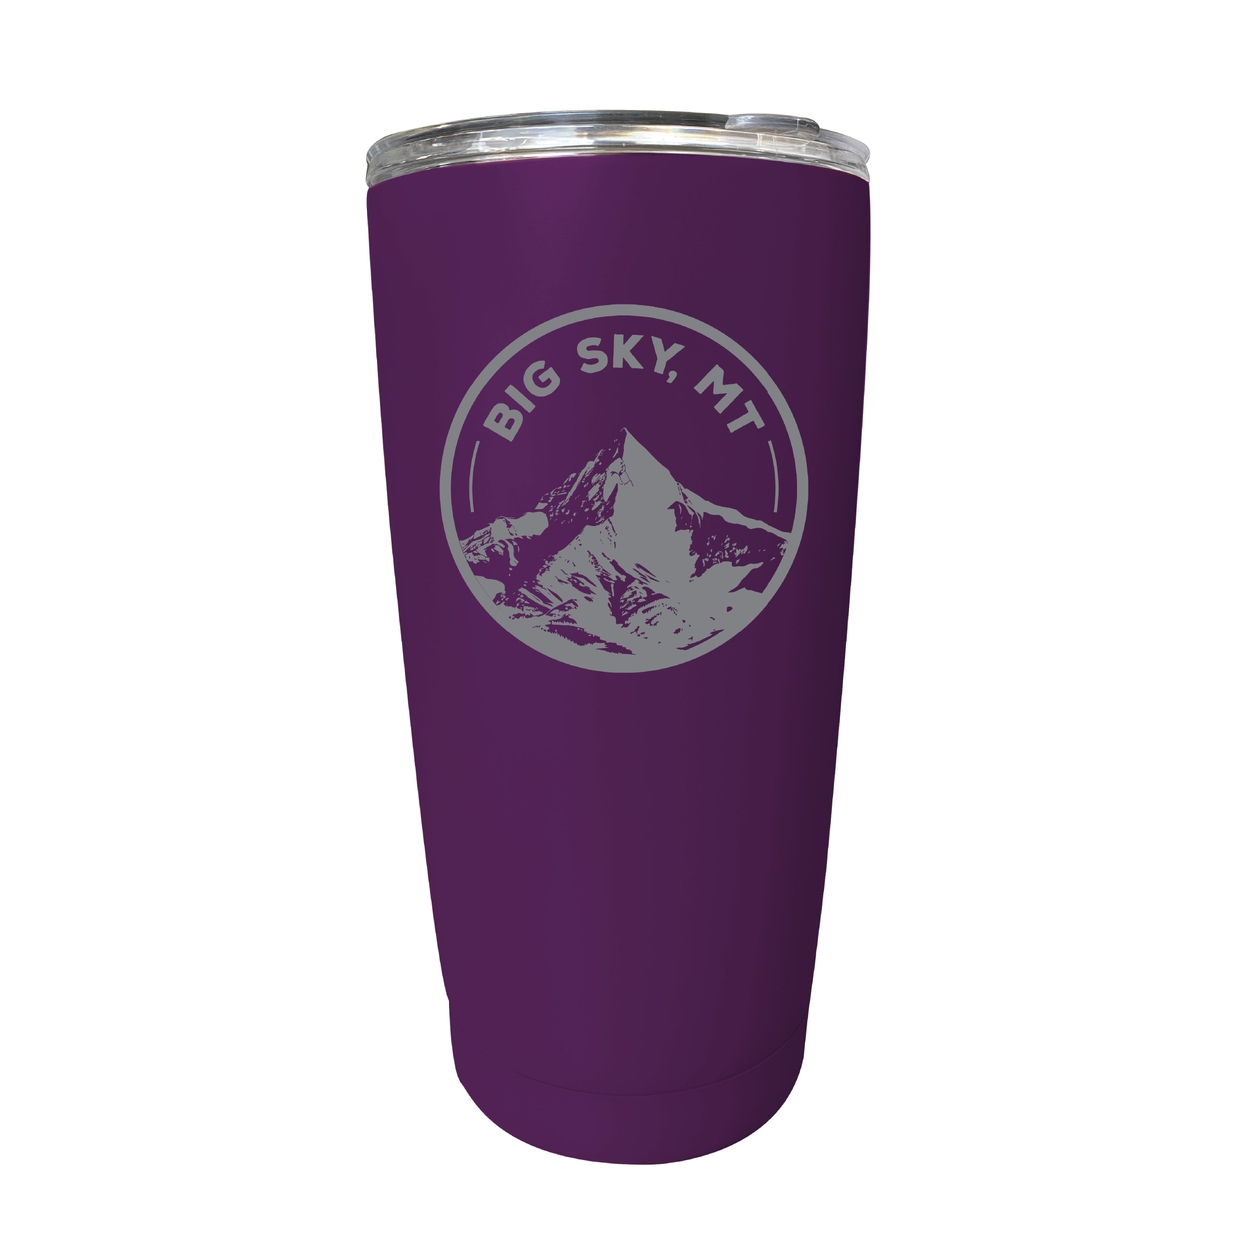 Big Sky Montana Souvenir 16 Oz Engraved Stainless Steel Insulated Tumbler - White,,4-Pack